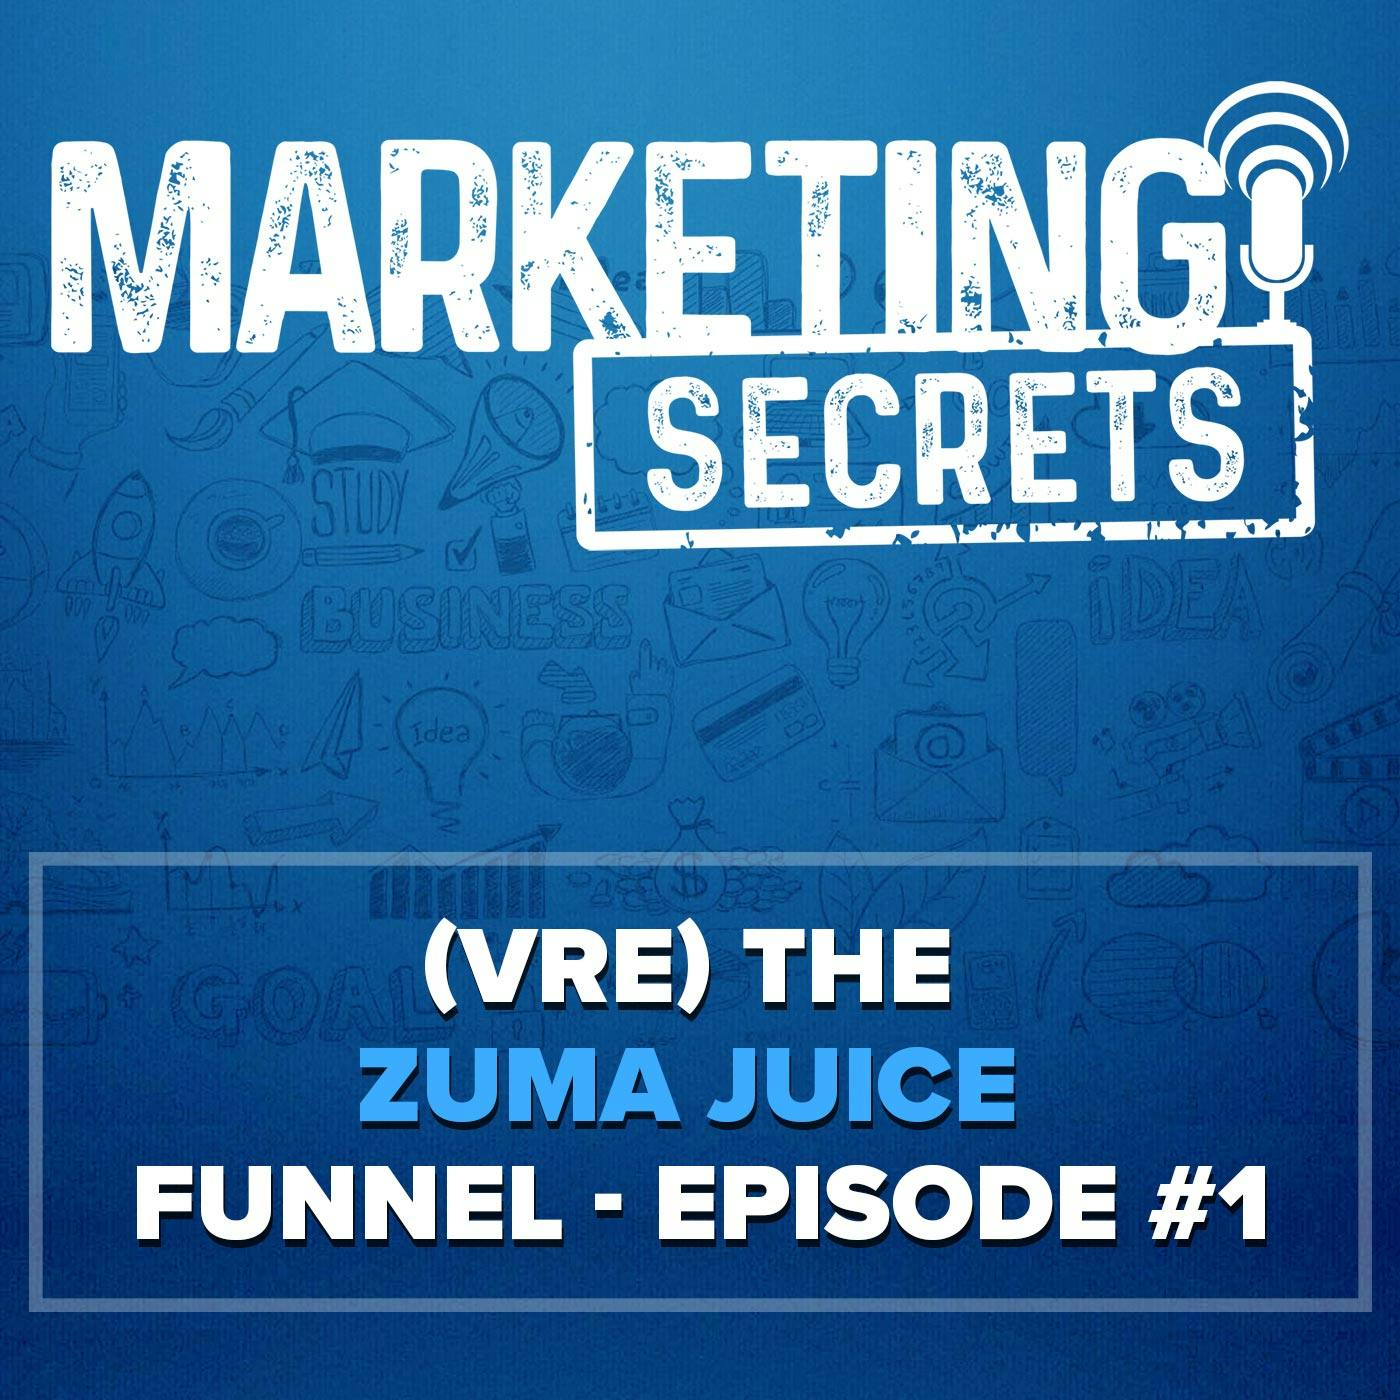 S2E3 - (VRE) The Zuma Juice Funnel - Episode #1 by Russell Brunson